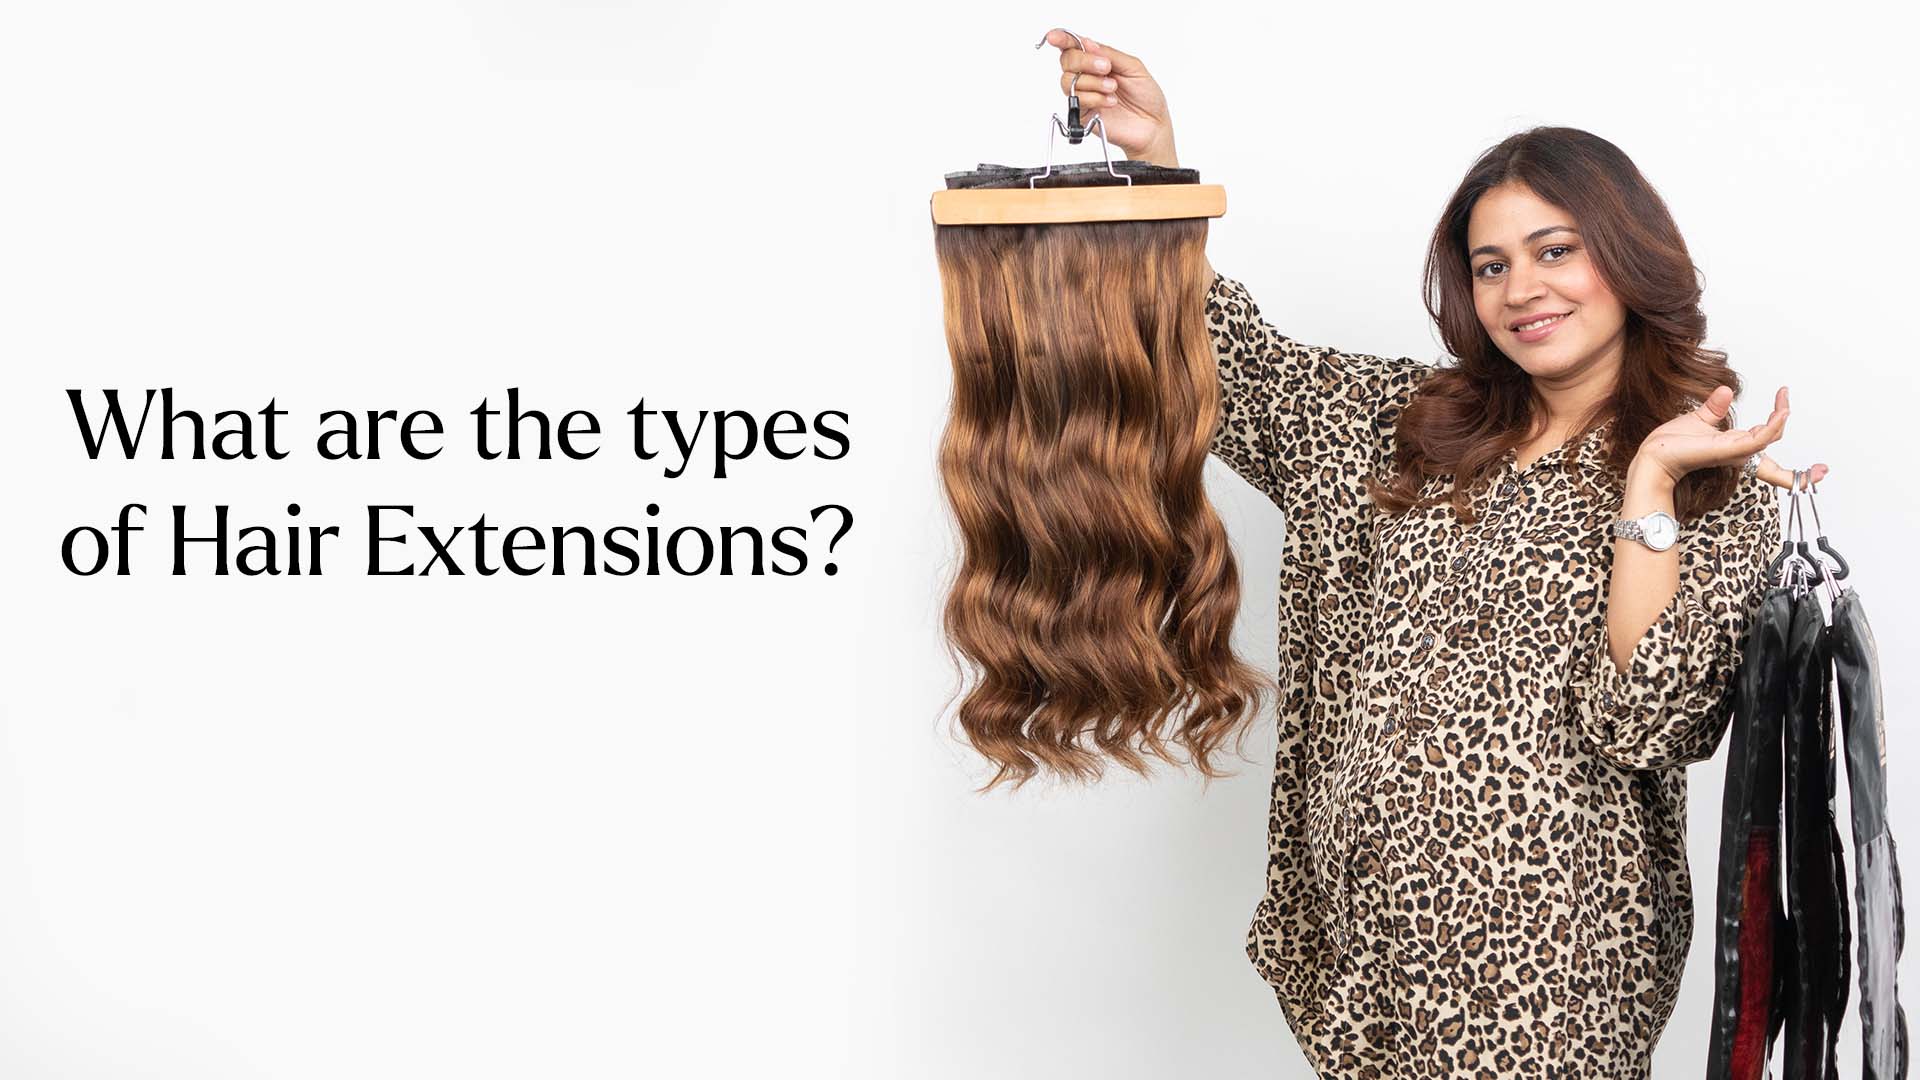 What are the types of Hair Extensions?